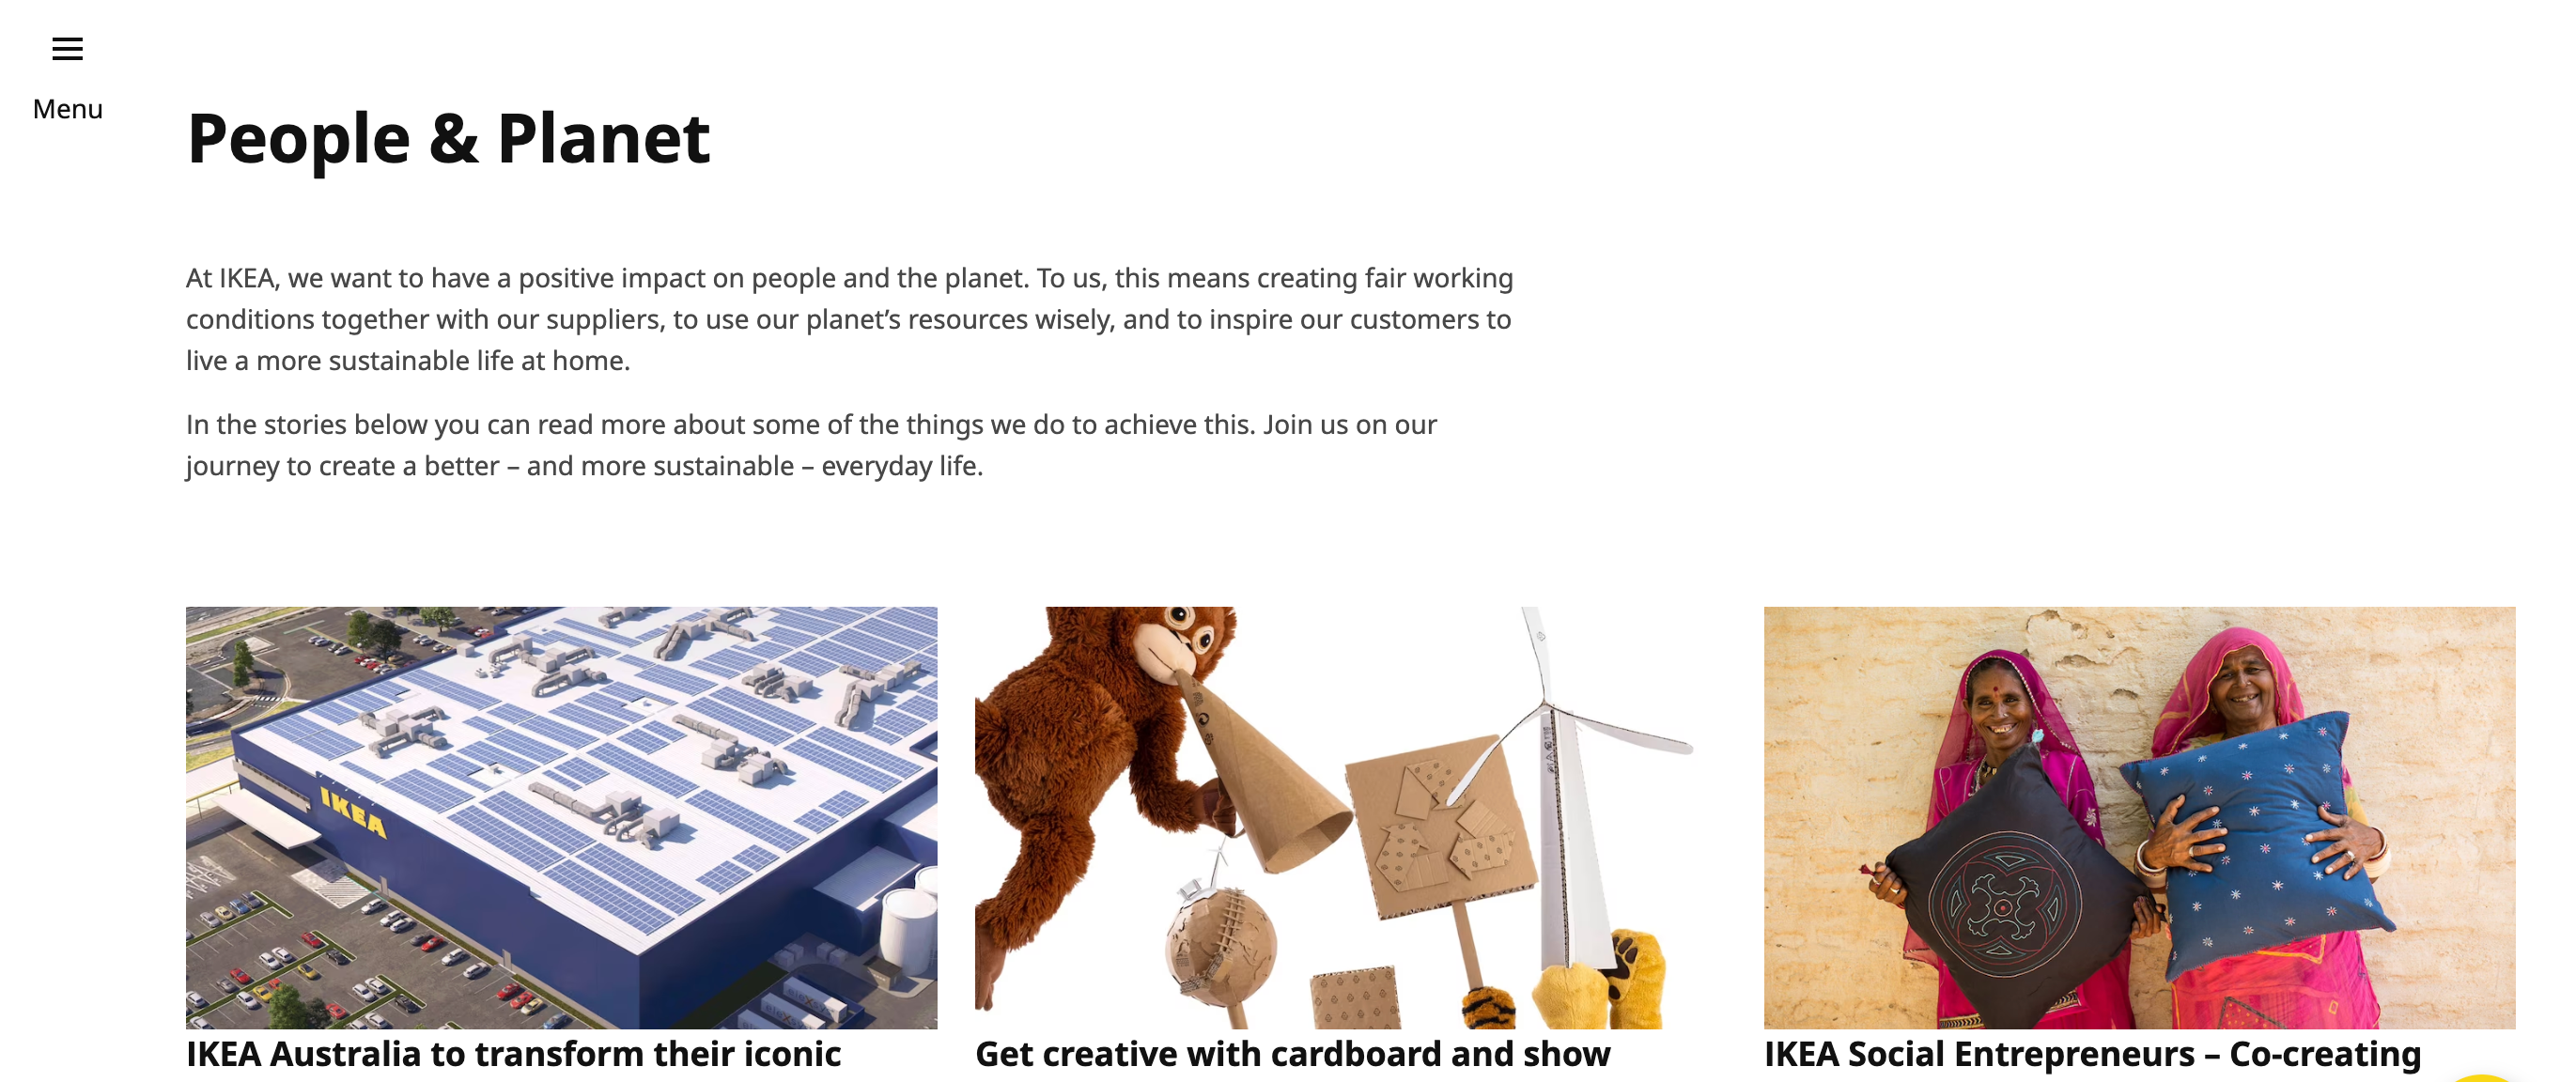 Ikea created their own sustainable, green marketing strategy called People & Planet Positive